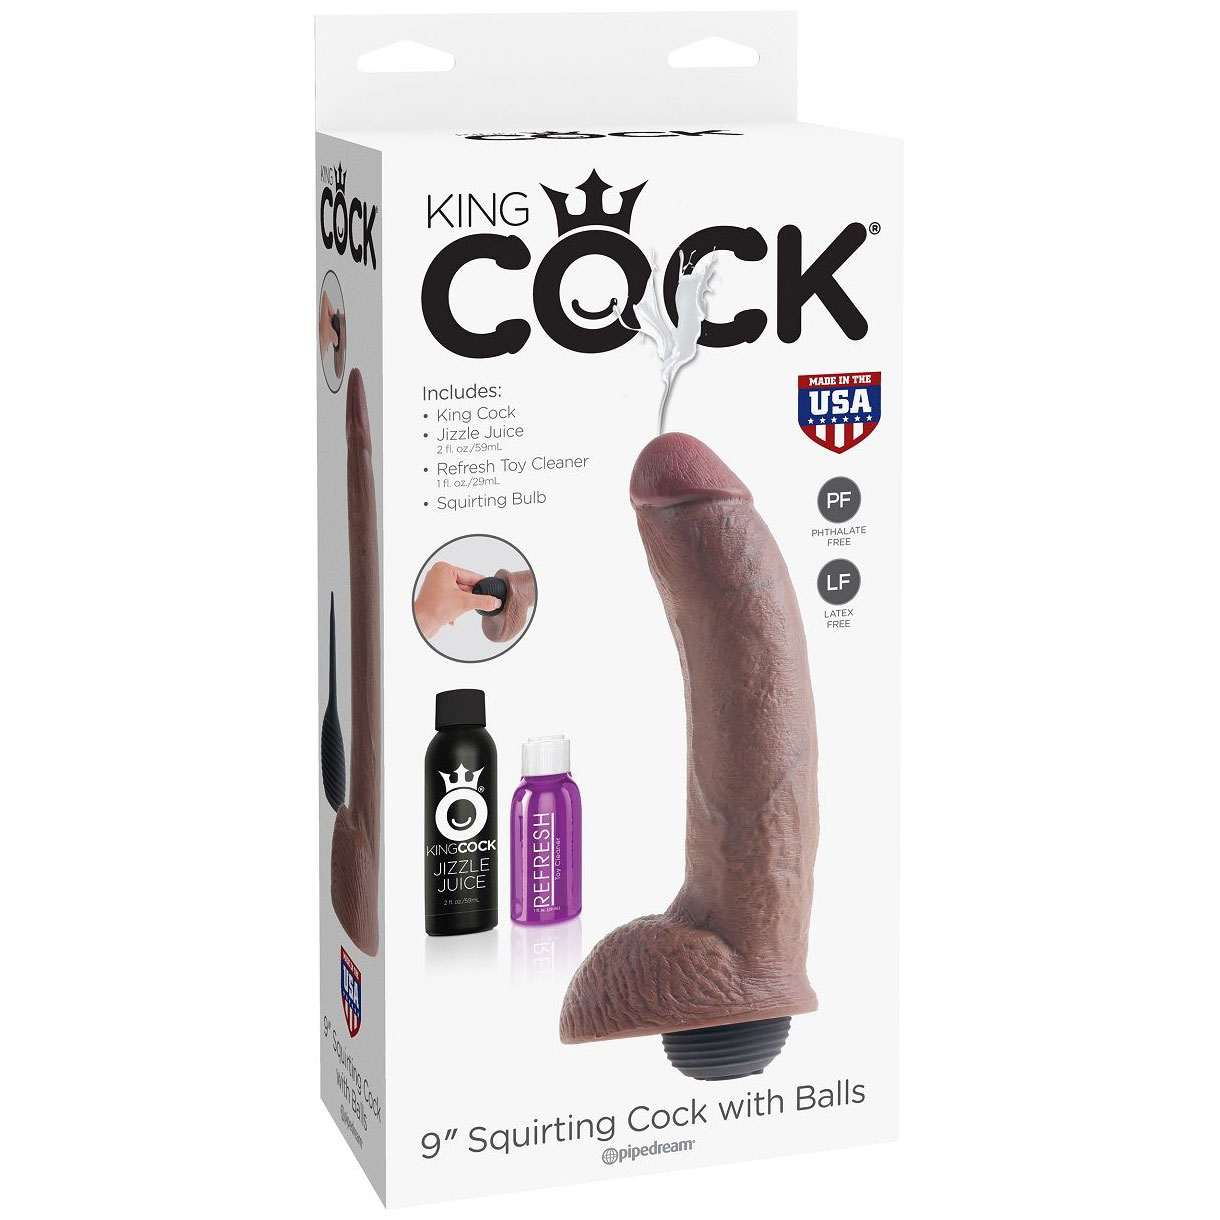 Squirting Cock